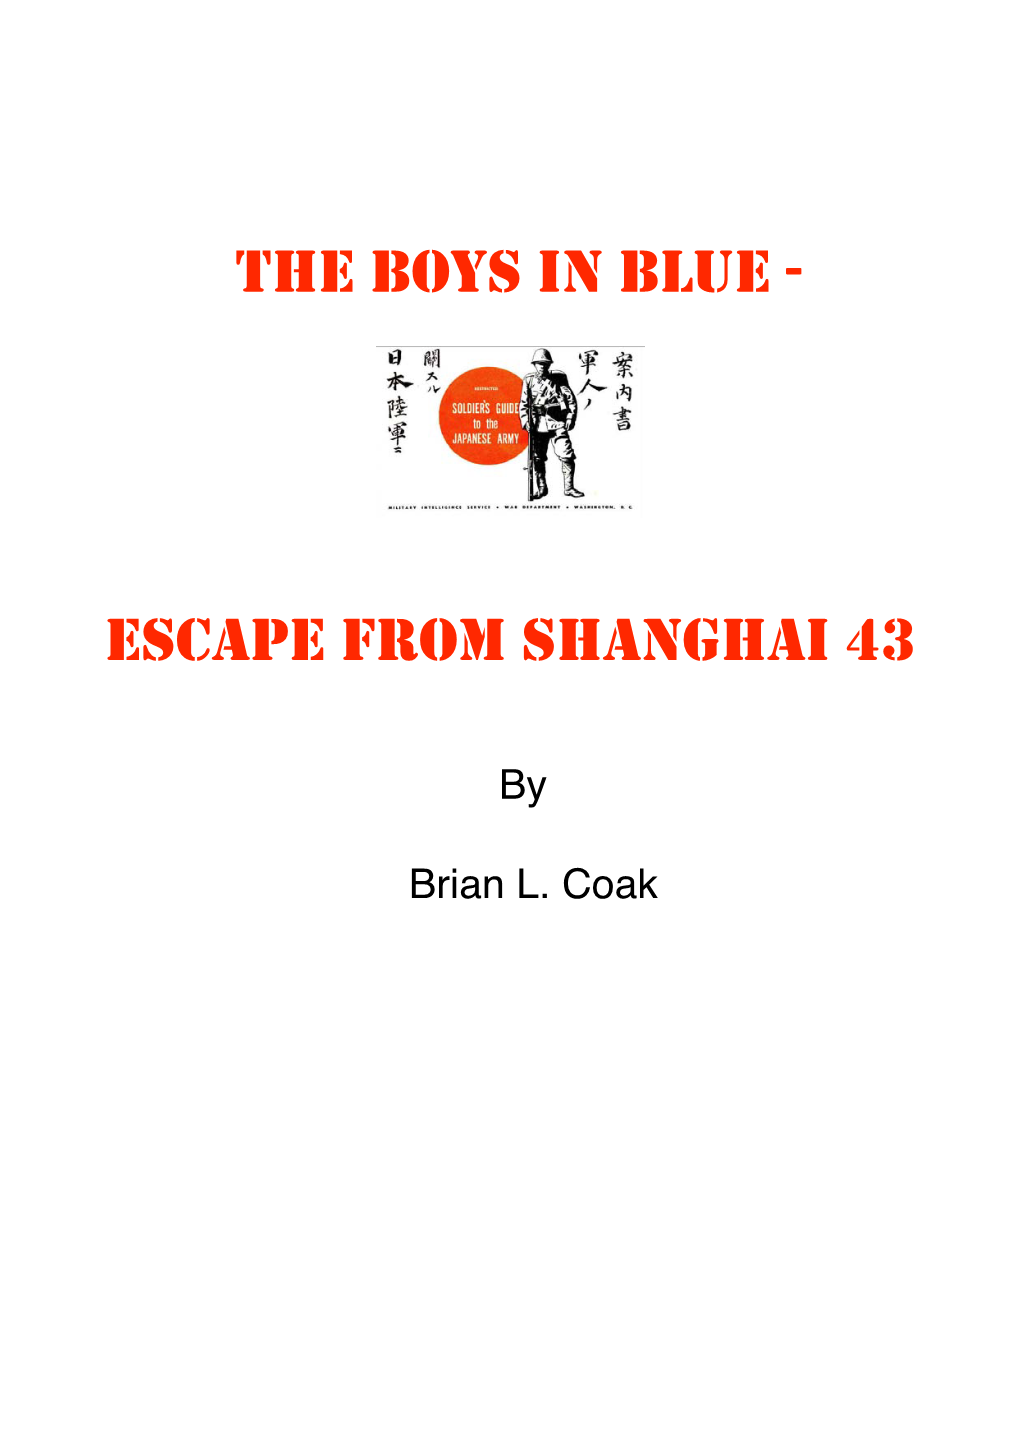 Escape from Shanghai 43 Part 1